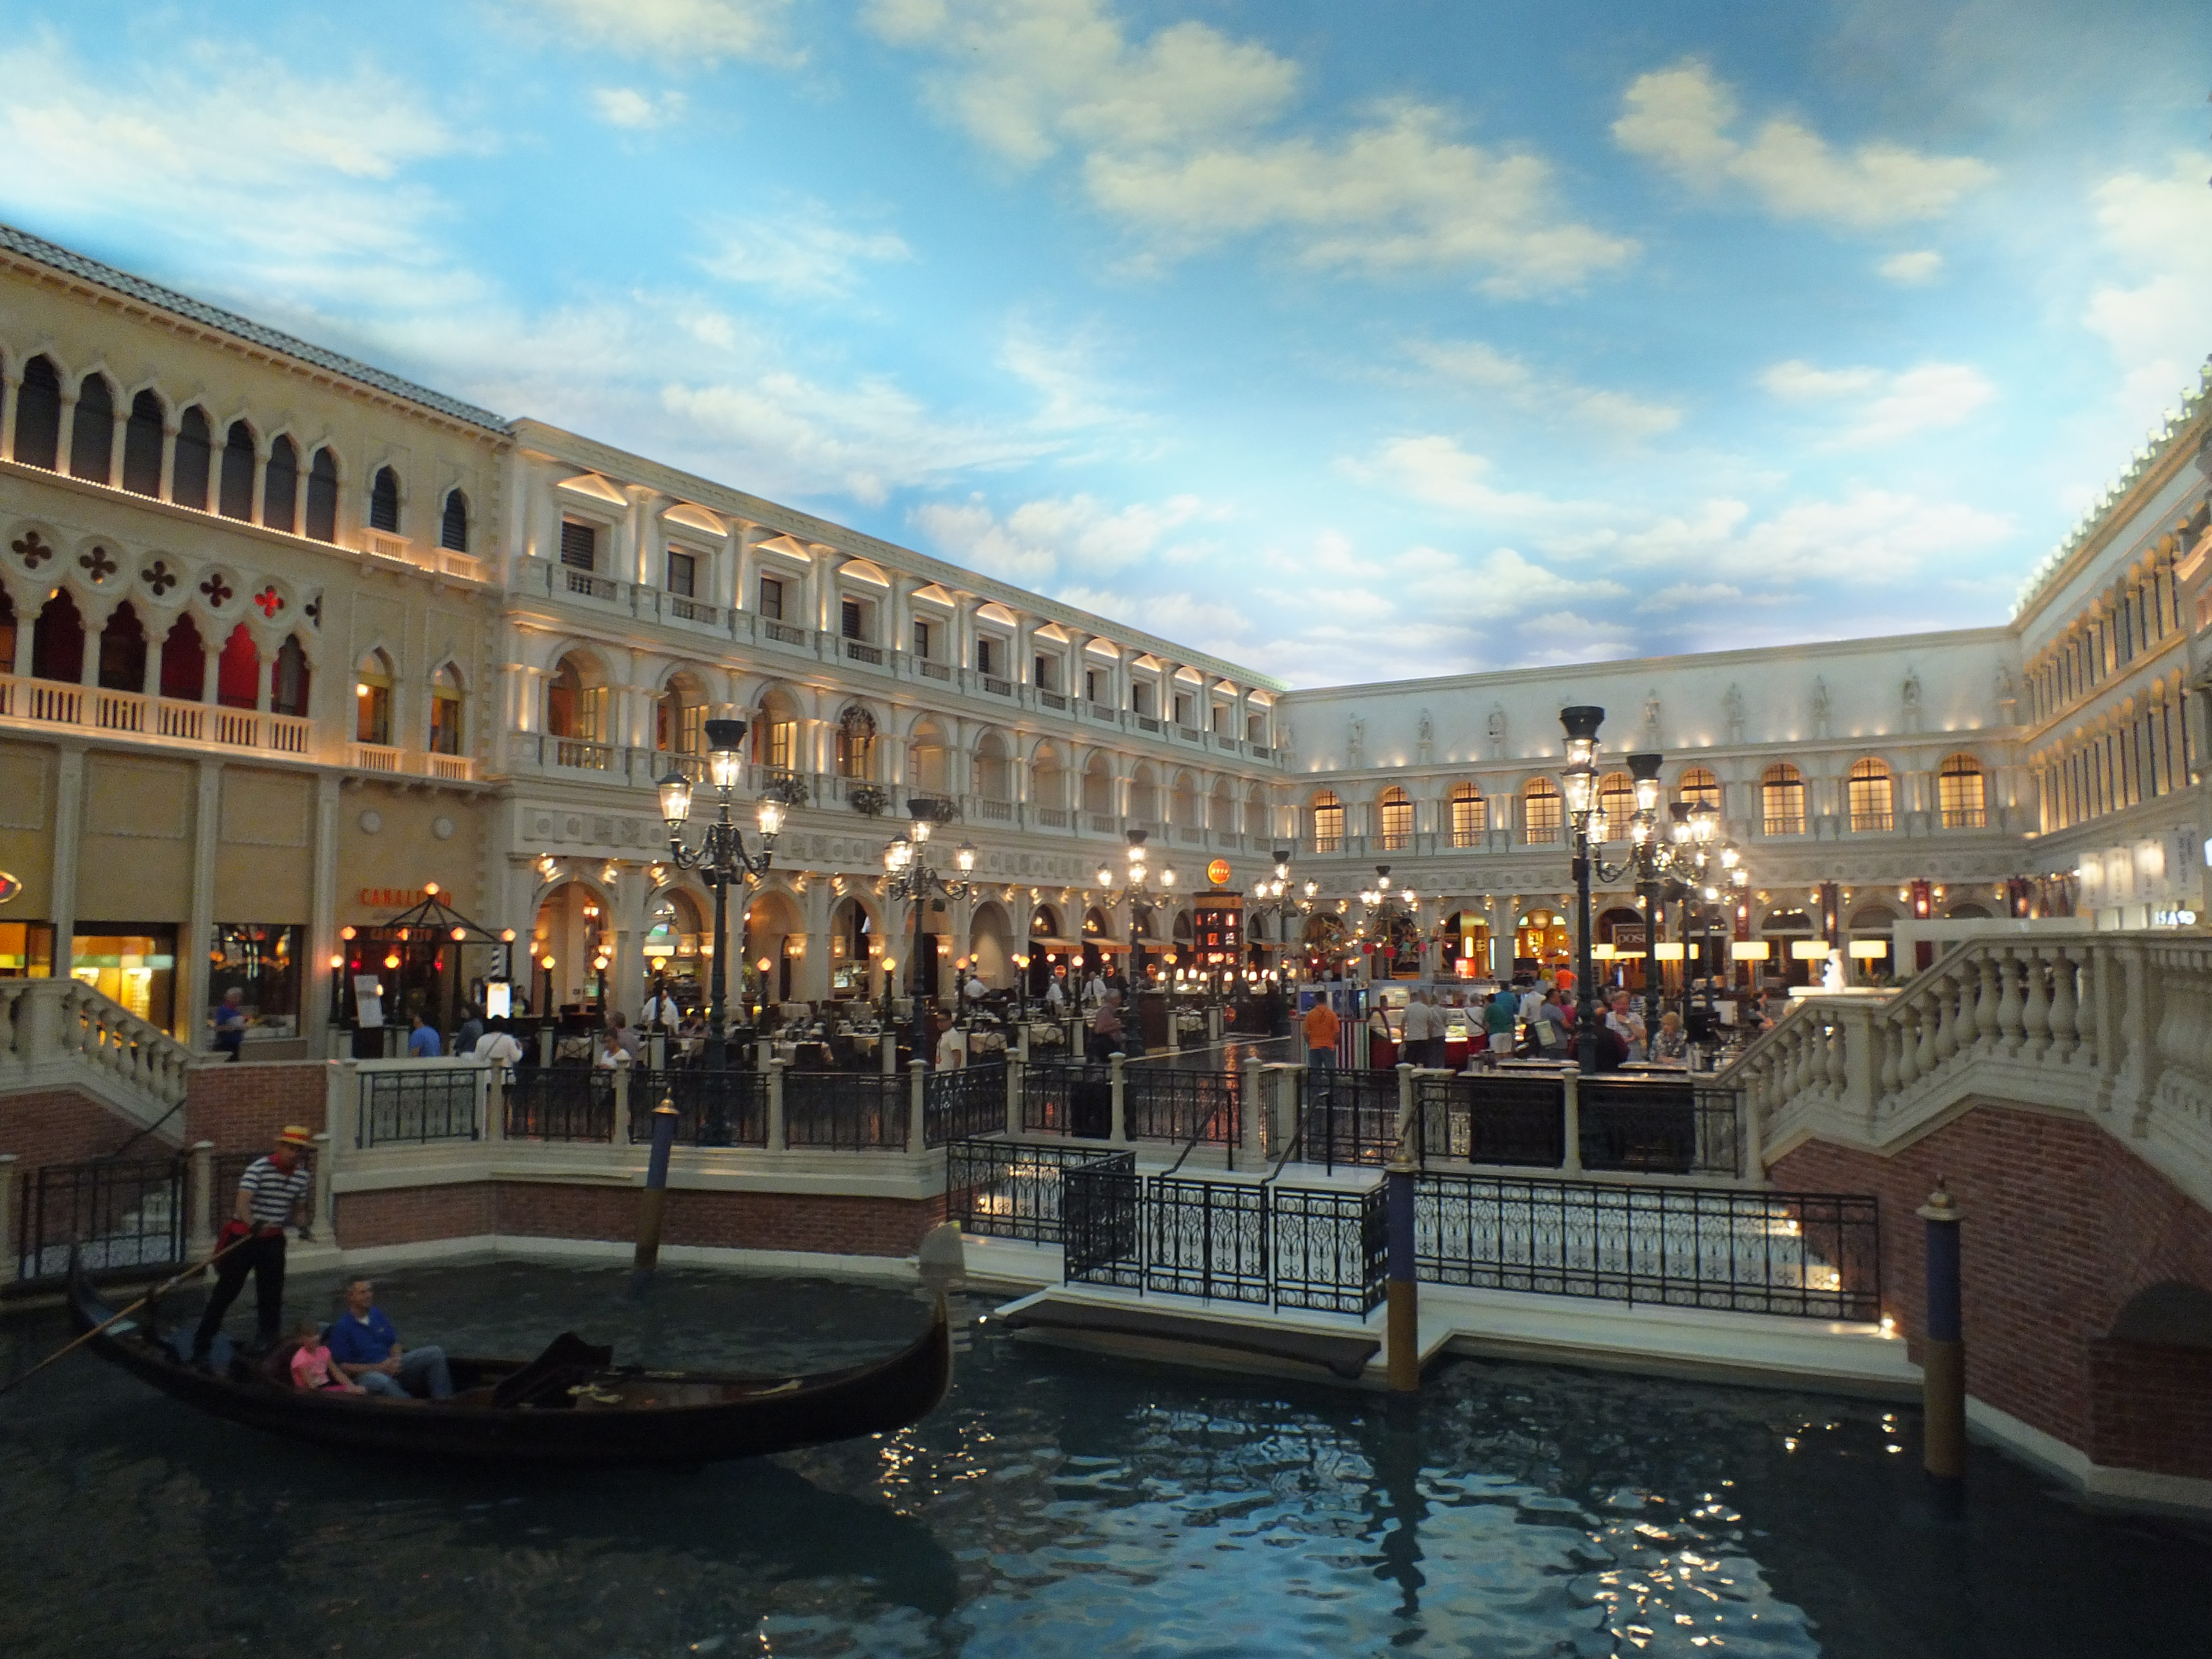 The upscale mall “Grand Canal Shoppes” inside the Venetian Palazzo Hotel  (ceiling is painted!) – Charlotteontheroad